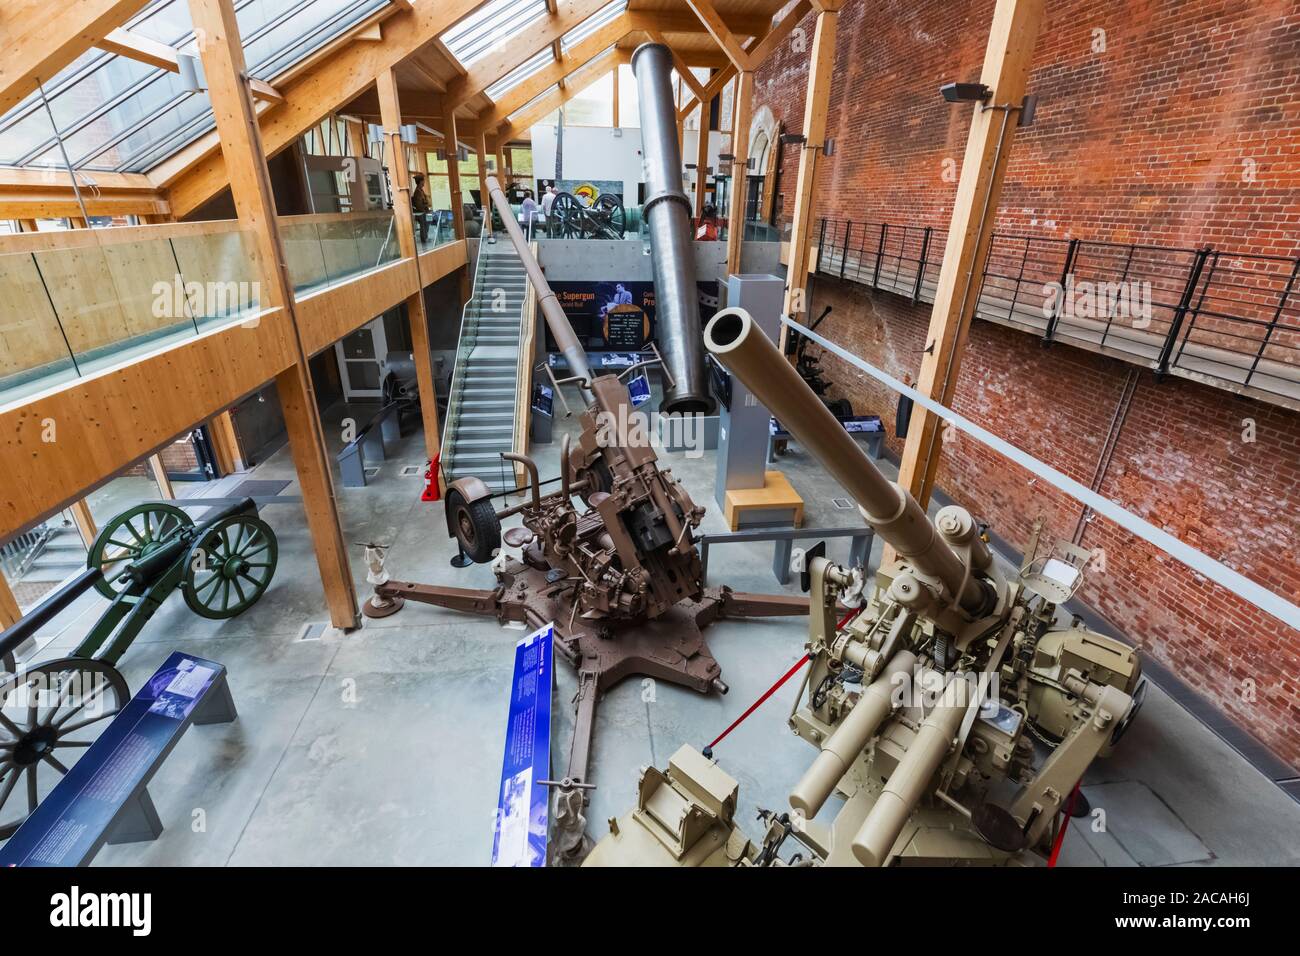 England, Hampshire, Portsmouth, Fareham, The Royal Armouries Military Museum at Fort Nelson, Display of Artillery Pieces Stock Photo